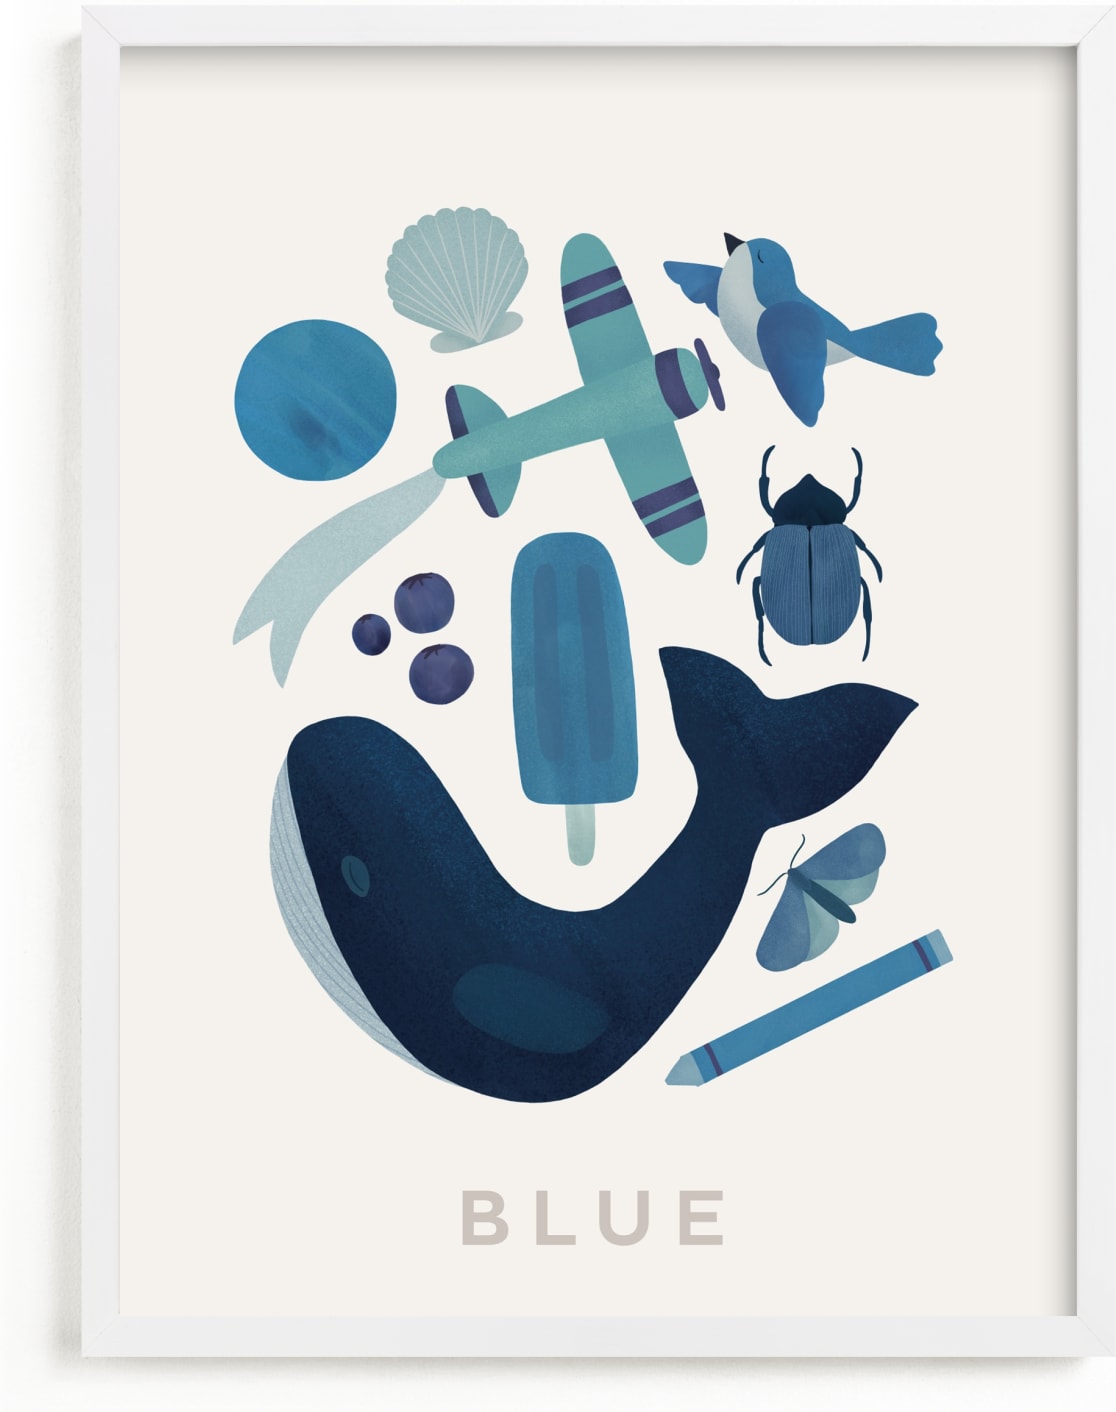 This is a blue kids wall art by Ana Peake called Ten Blue Things.